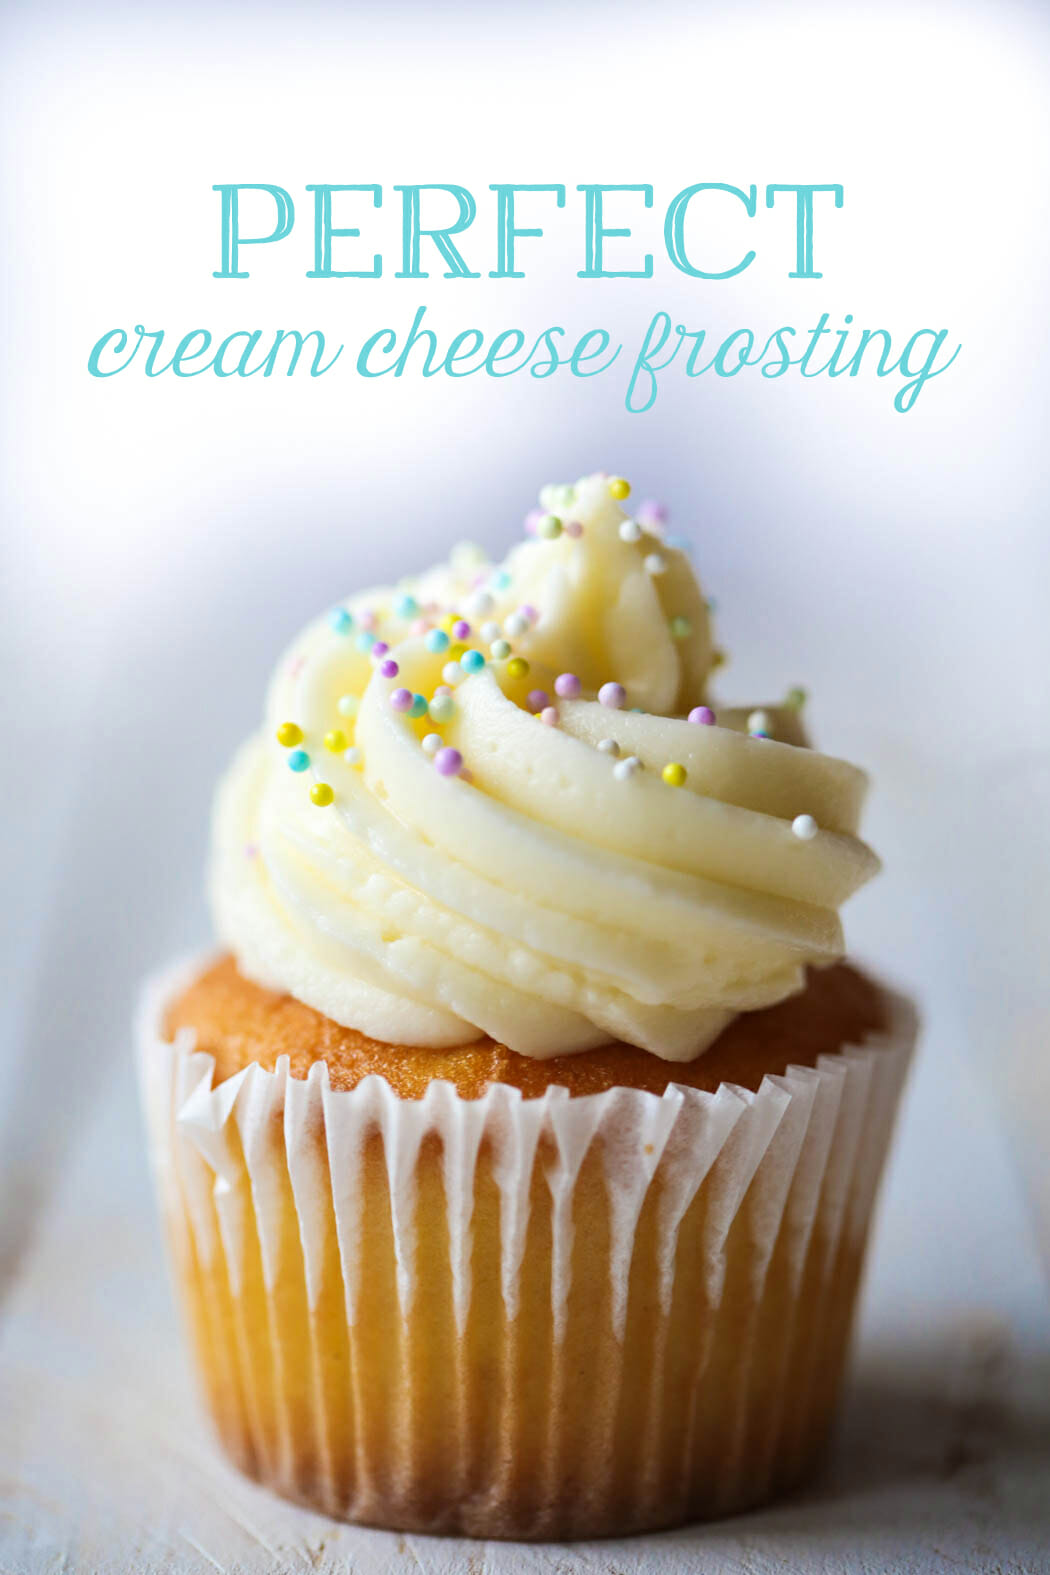 perfect cream cheese frosting from Our Best Bites